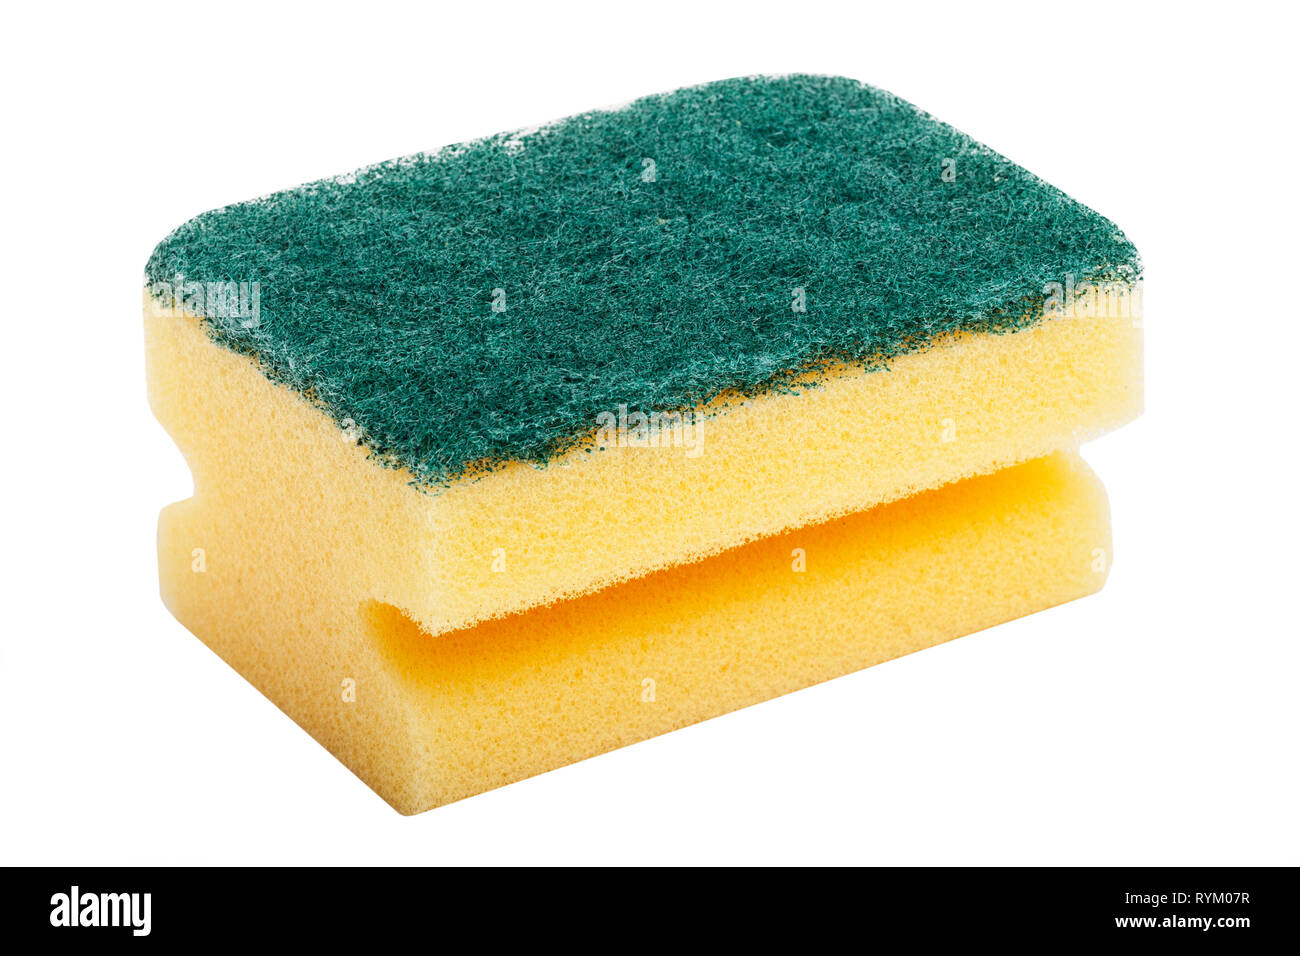 A cleaning sponge on a white background Stock Photo